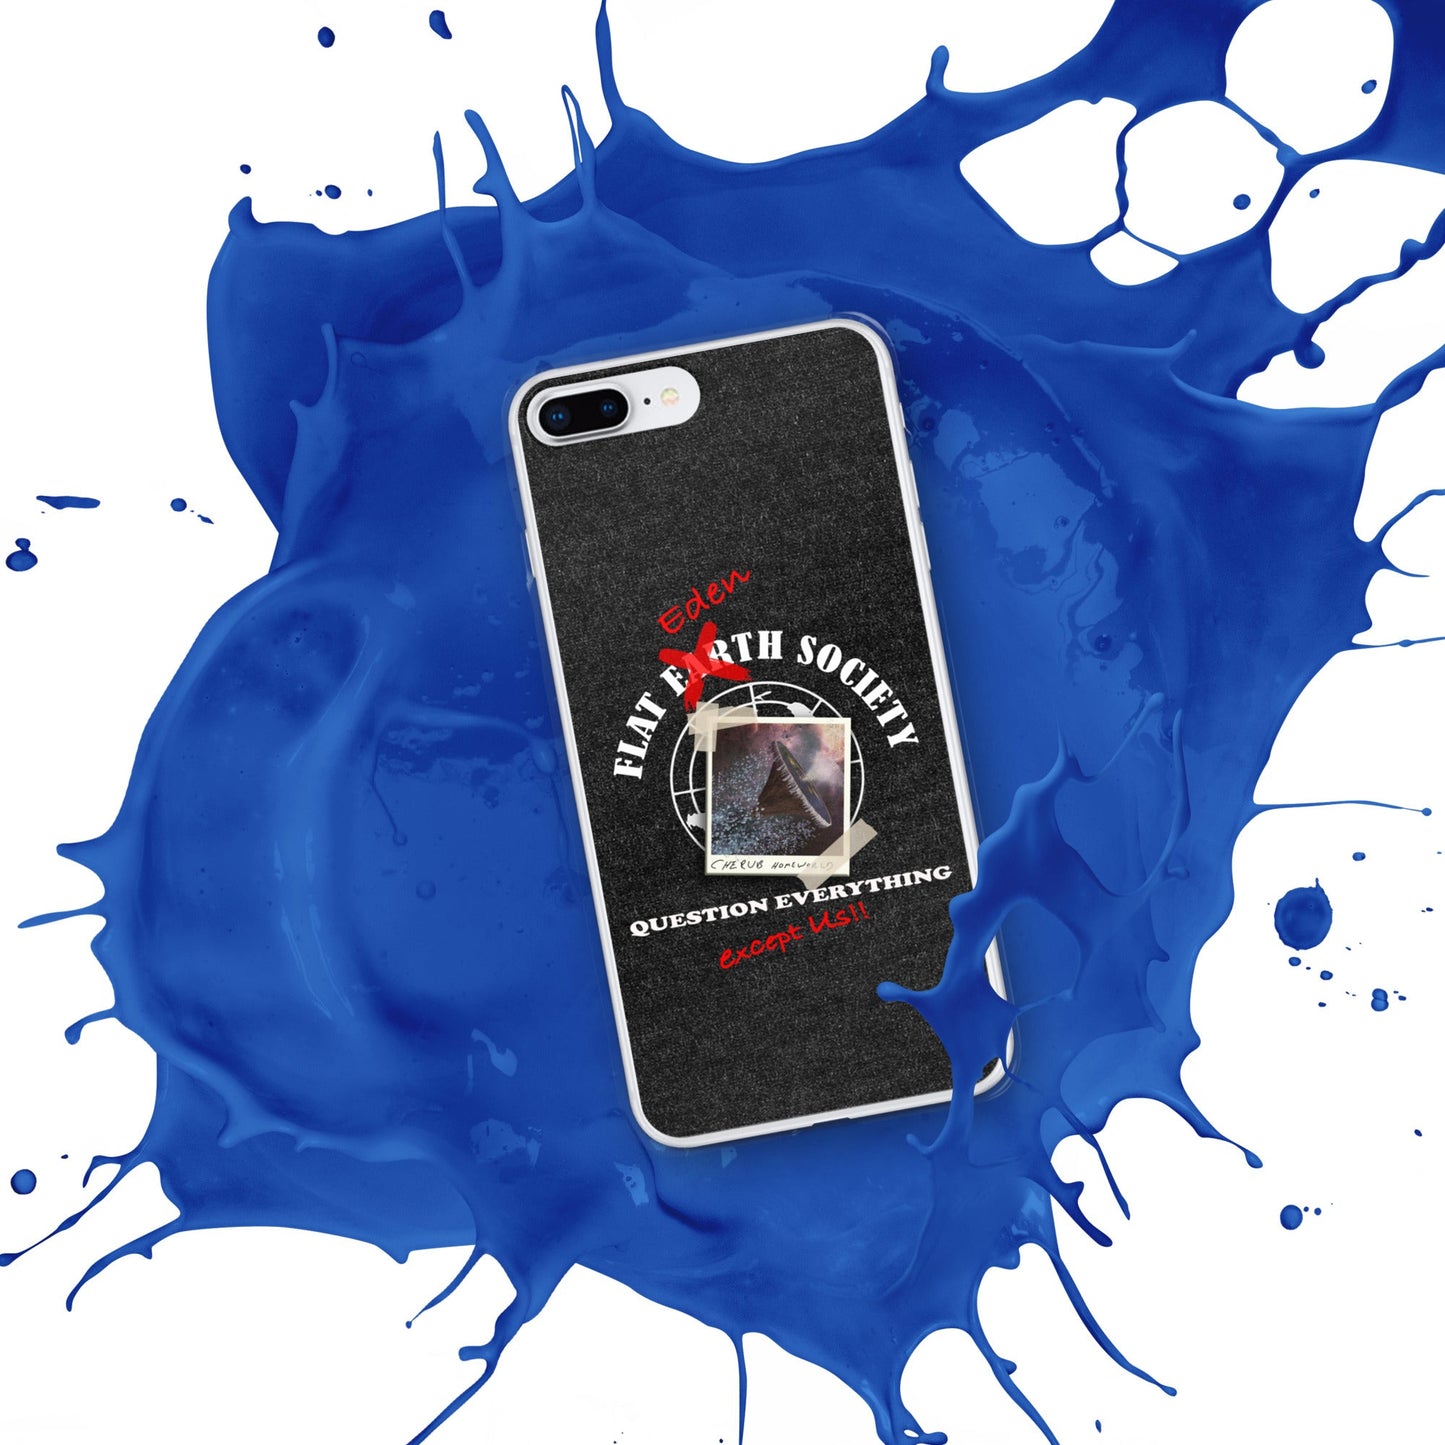 iPhone Case | Intergalactic Space Force 2 | Flat Eden Society - Spectral Ink Shop - Mobile Phone Cases -9780728_7911